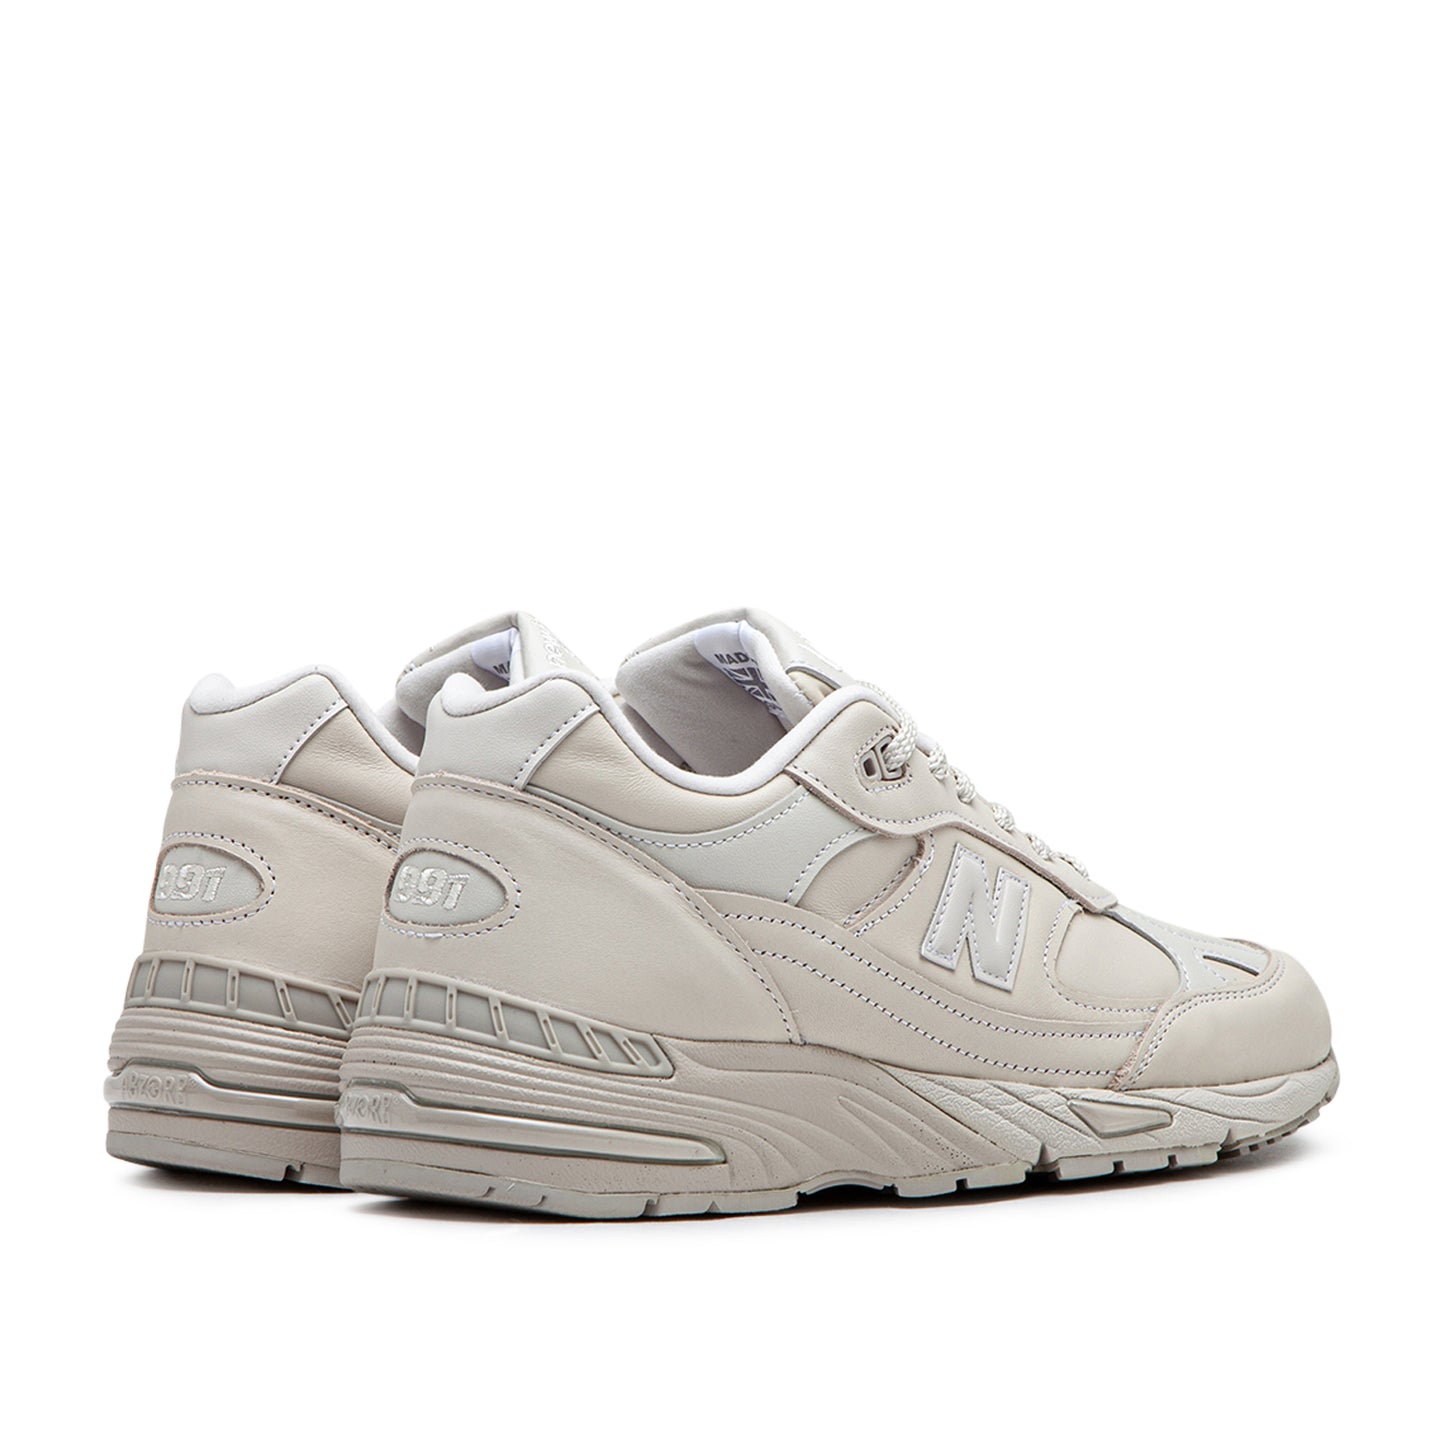 New Balance M991OW Made in UK Contemporary Luxe (Creme)  - Cheap Cerbe Jordan Outlet